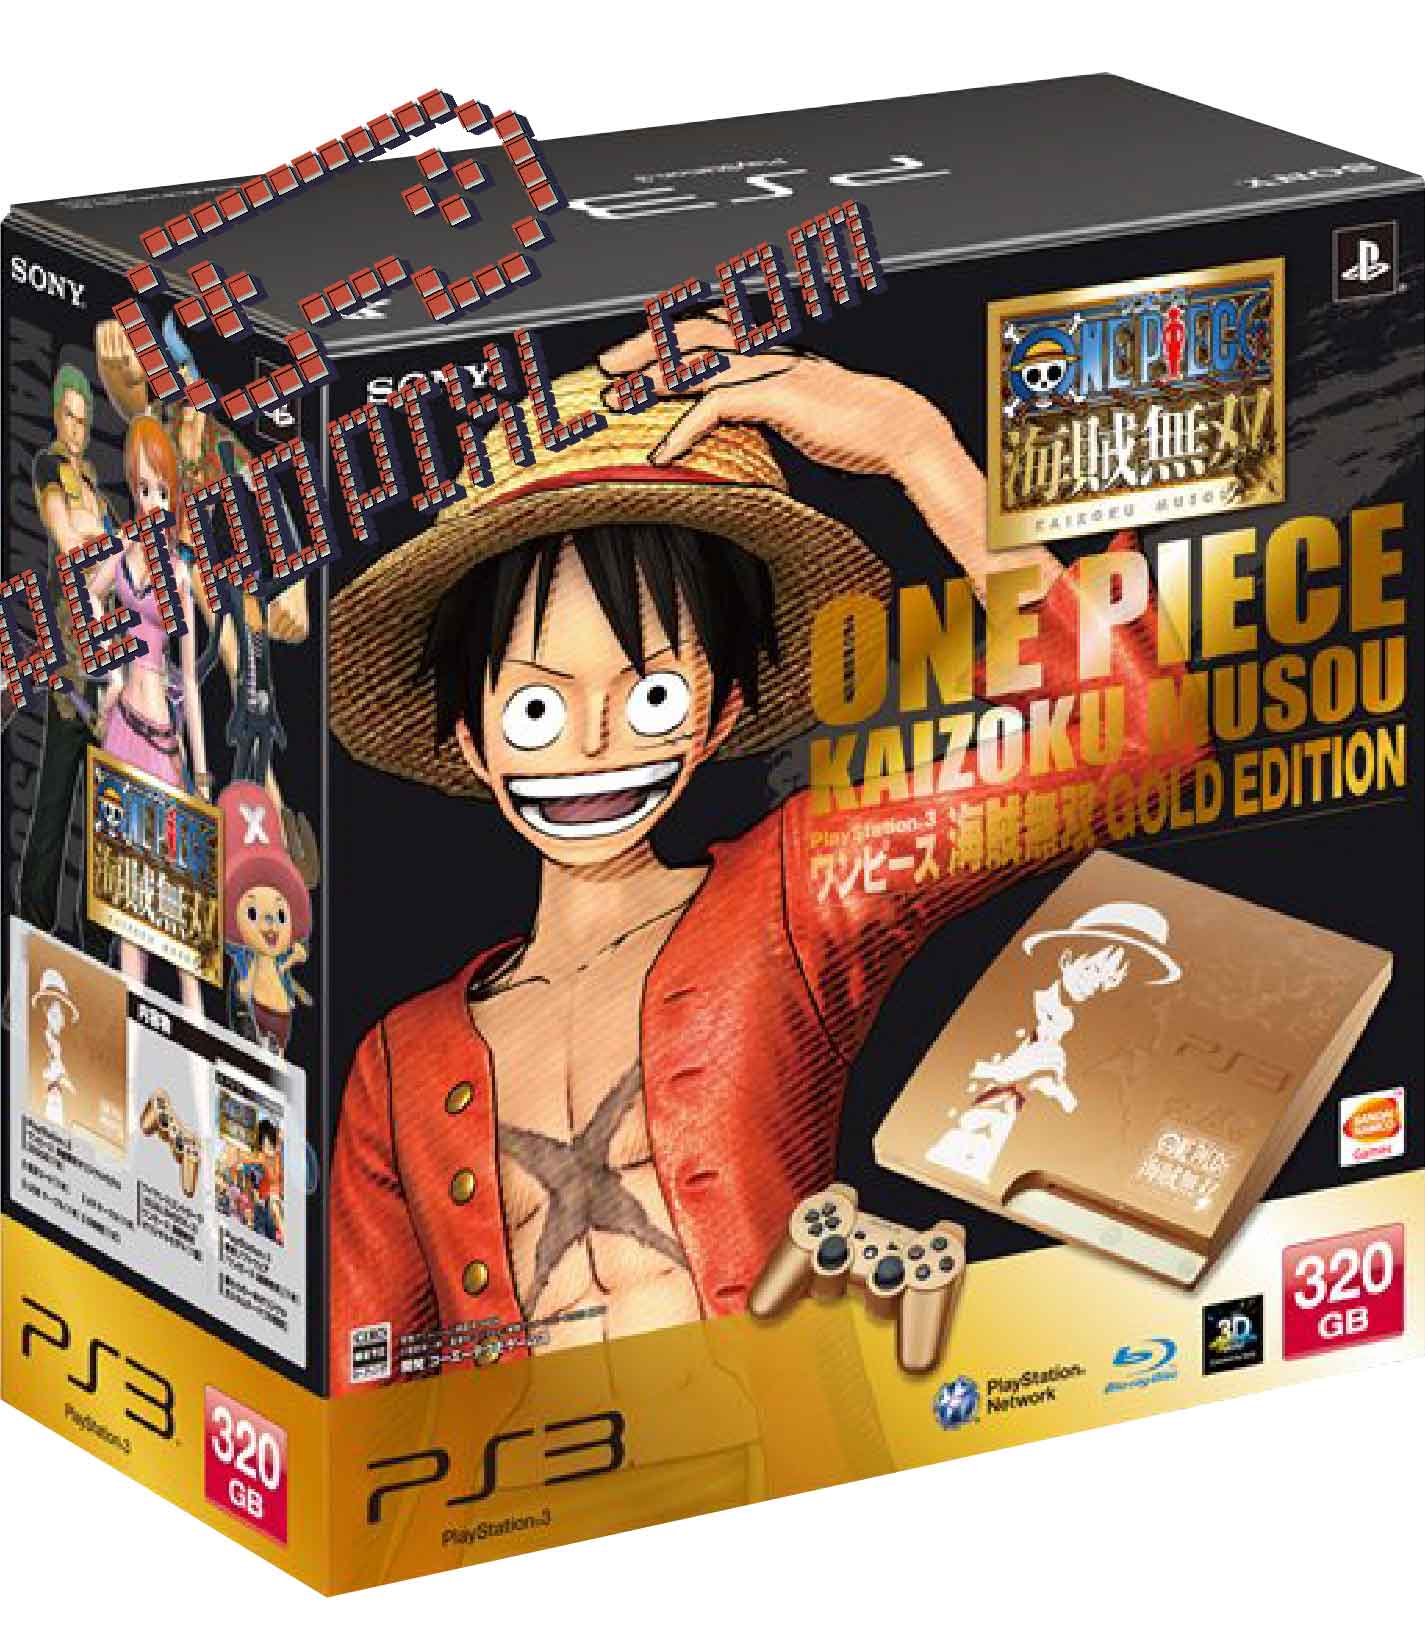 Sony Playstation 3 (PS3) One Piece Pirate Warriors LIMITED EDITION Bundle